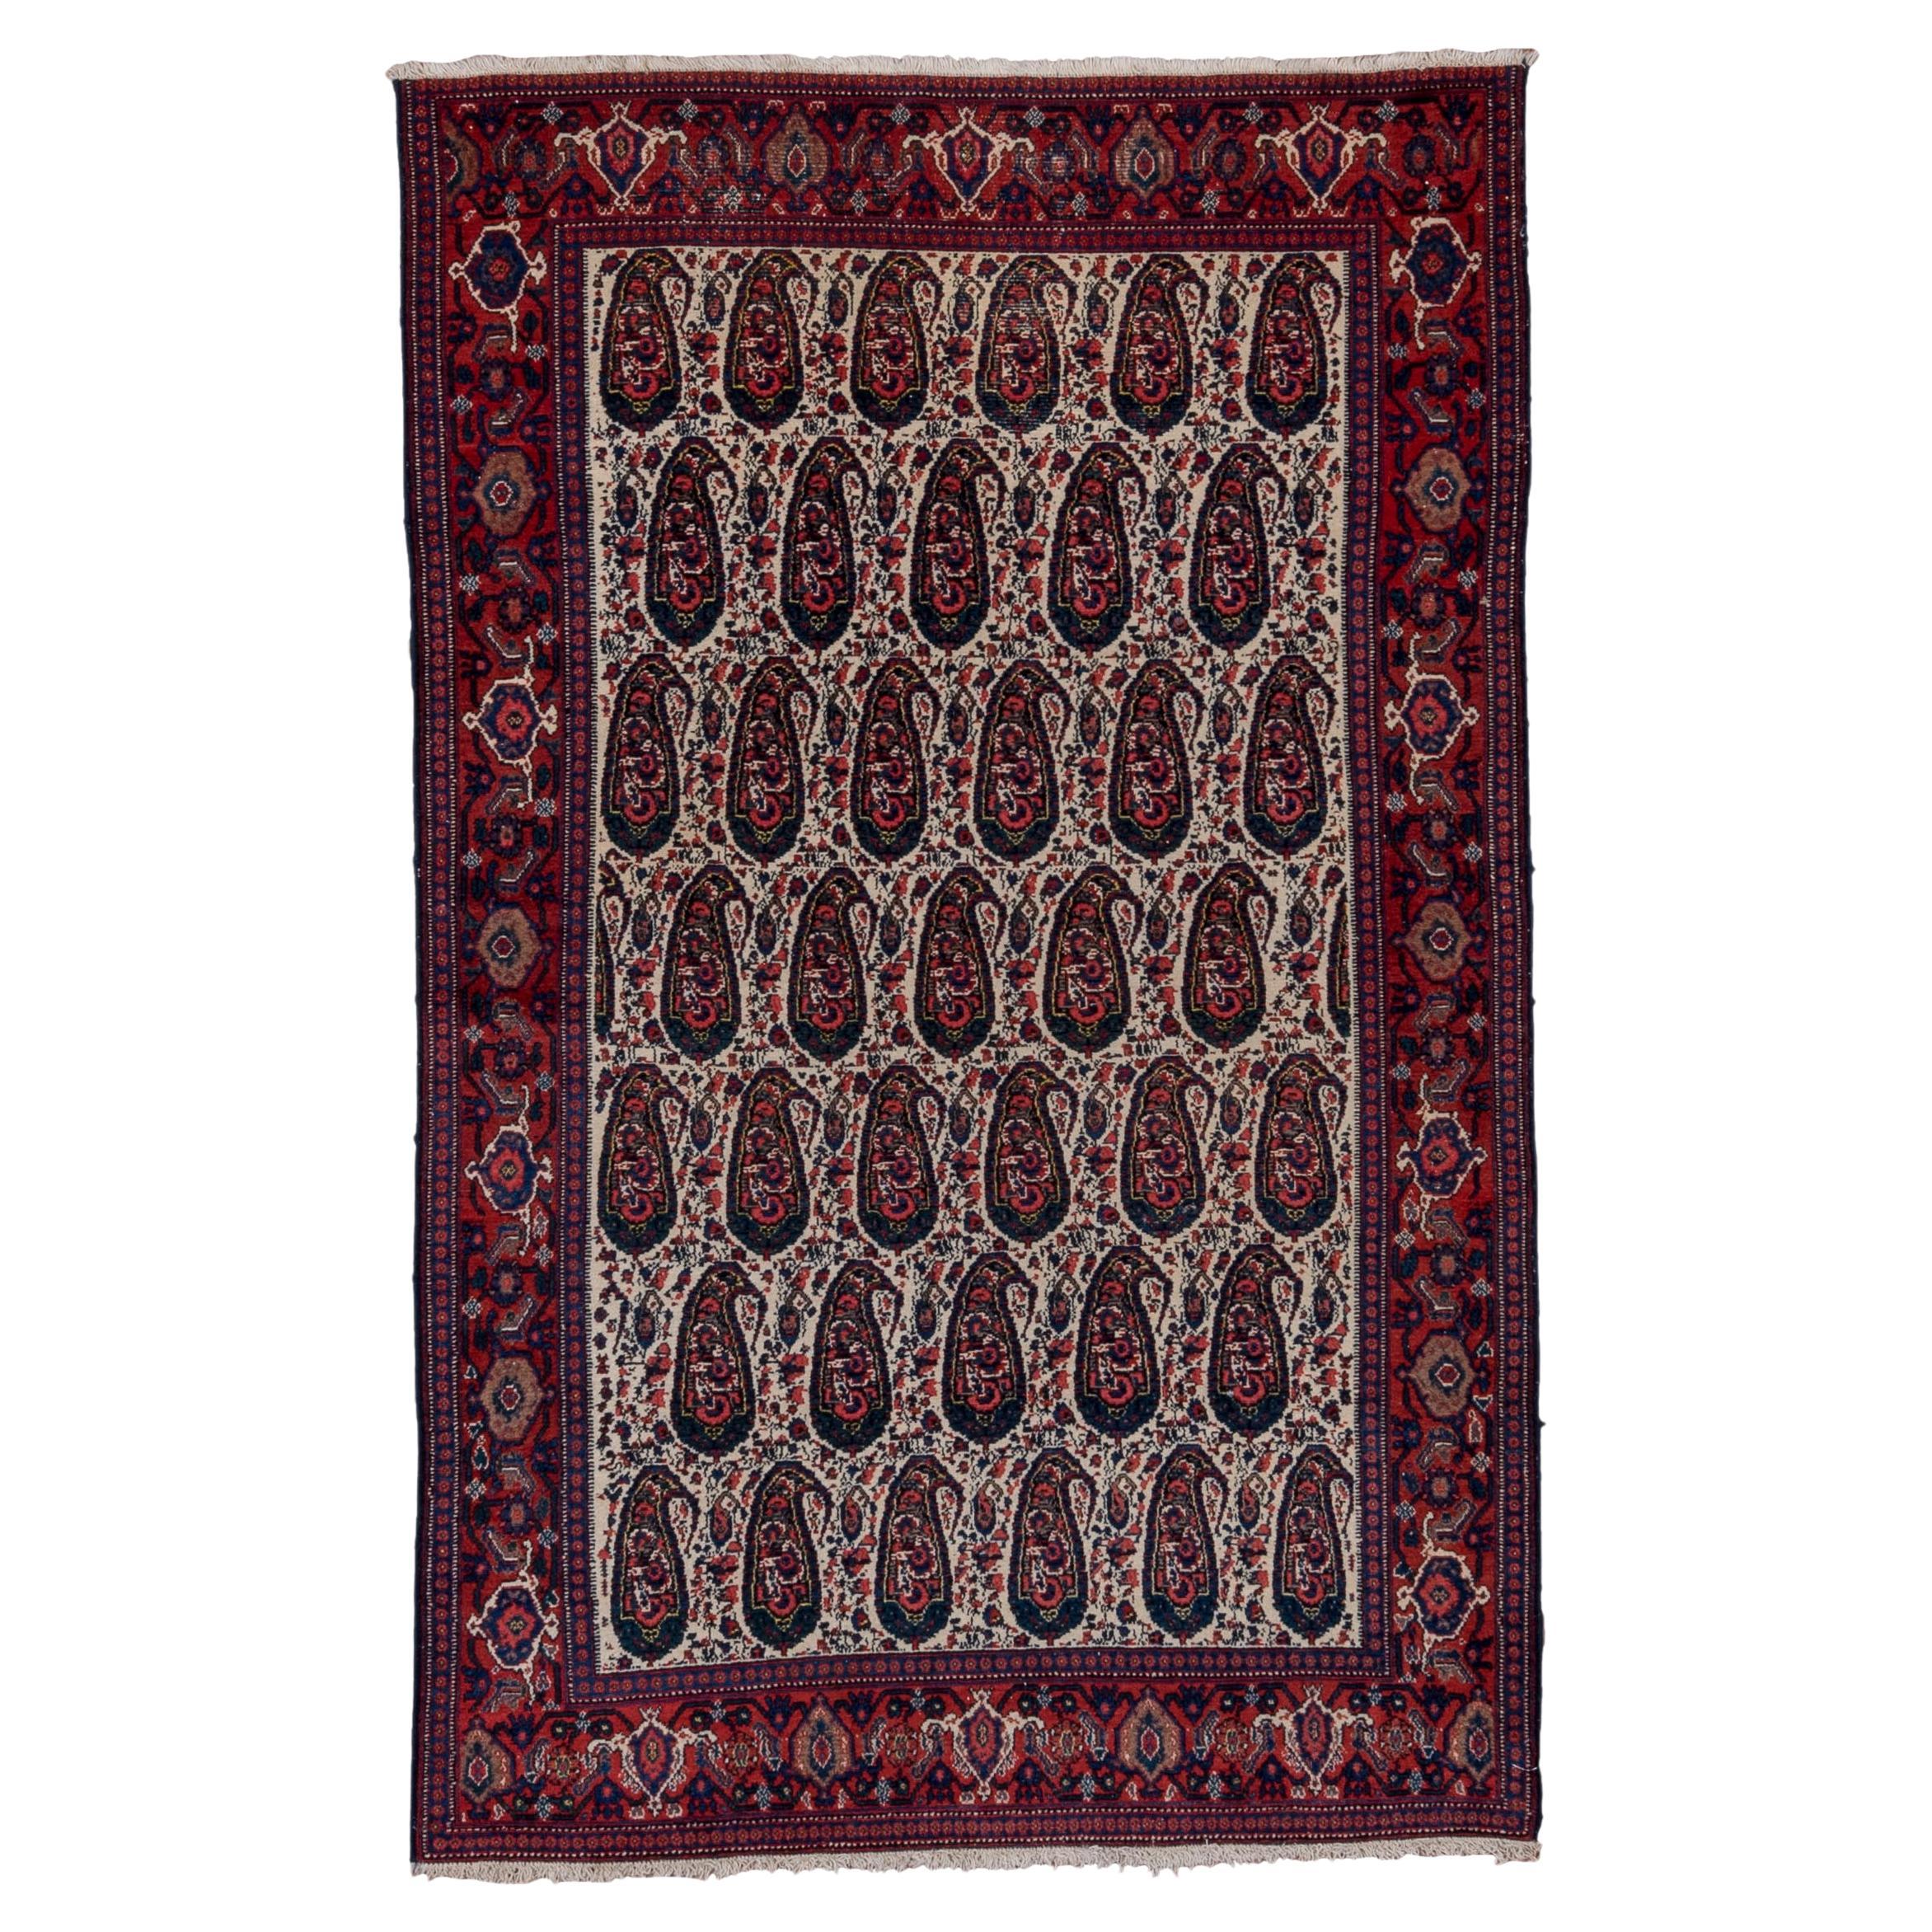 Senne Persian Antique Rug in Various Purple Shades